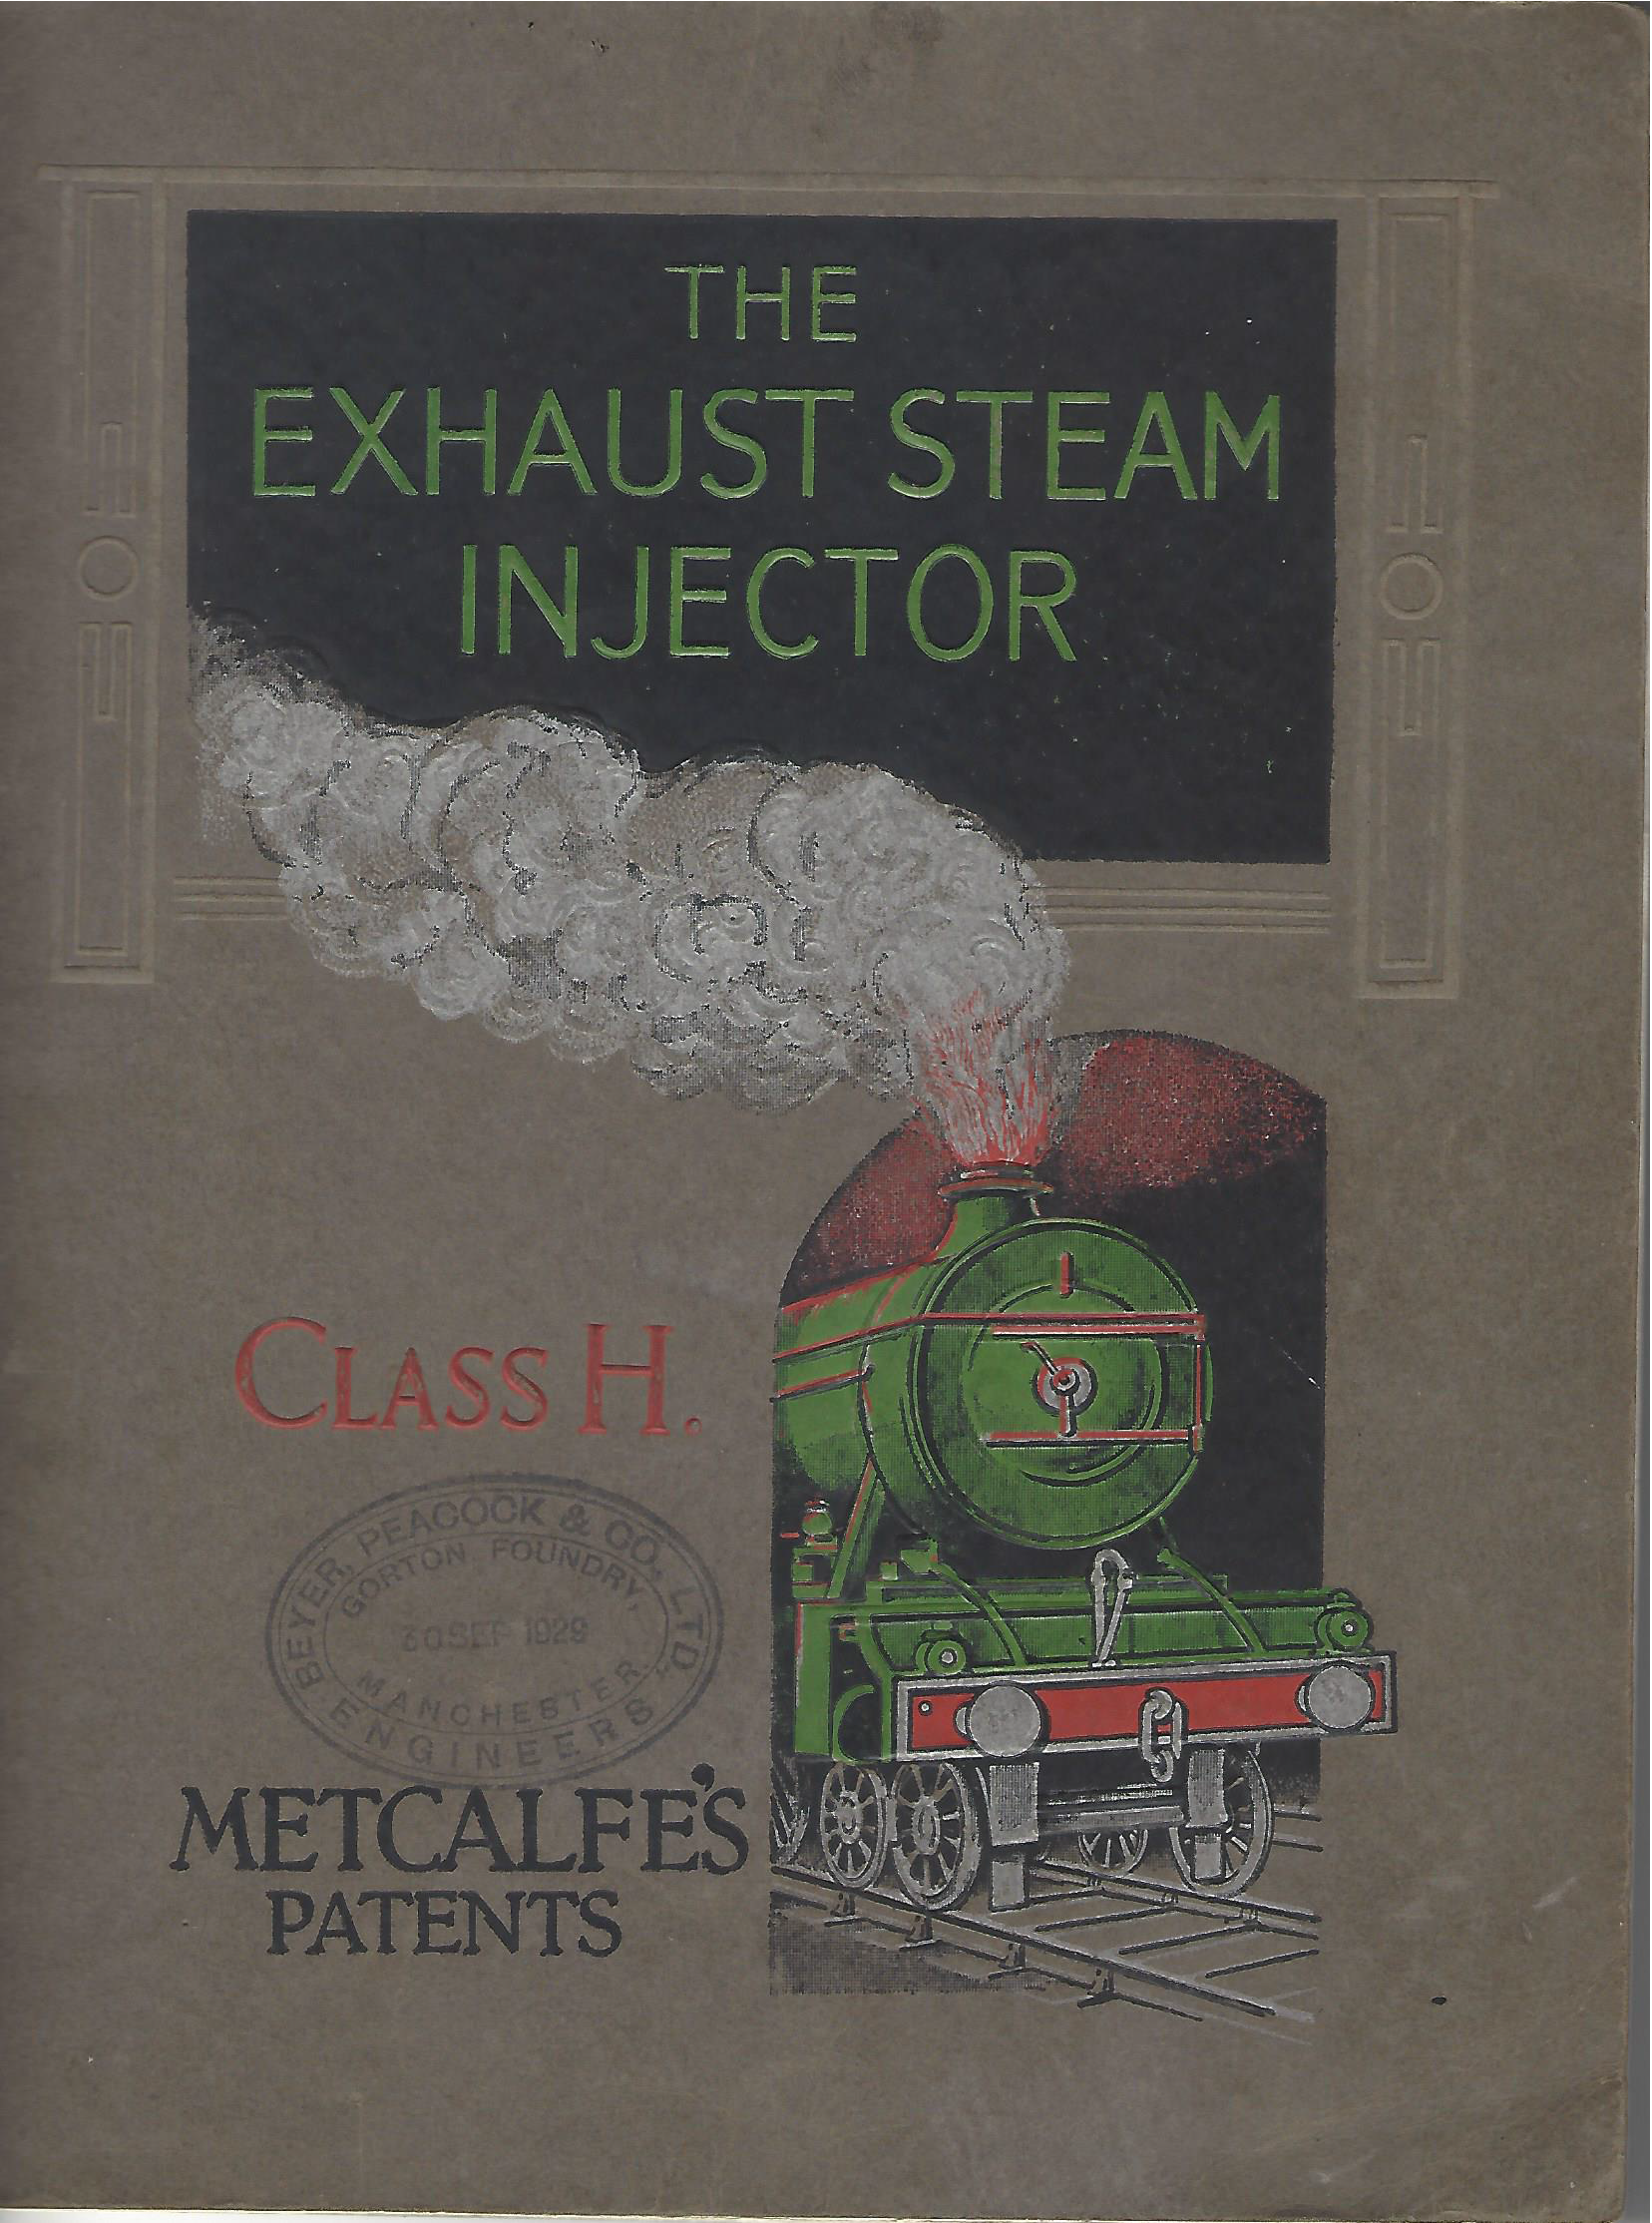 The Exhaust Steam Injector